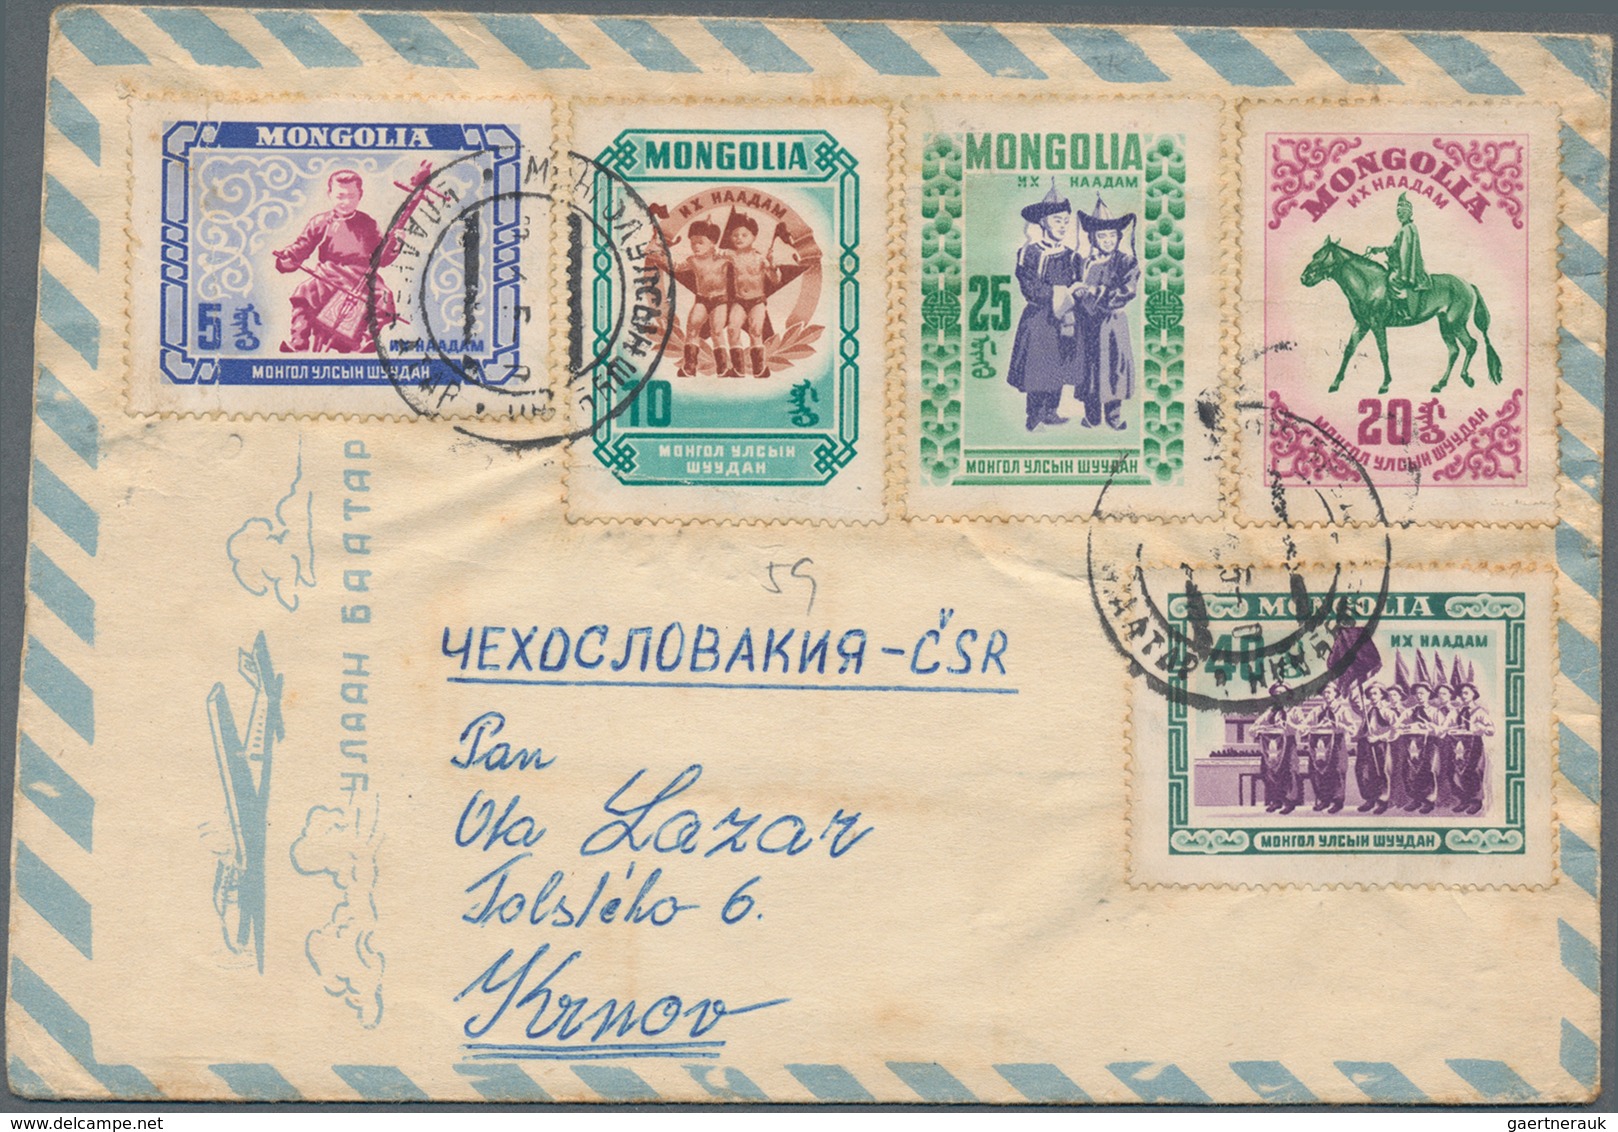 Mongolei: 1956/1961, 16 Covers To Europe All With Some Traces Of Usage. Very Scarce Offer. - Mongolei